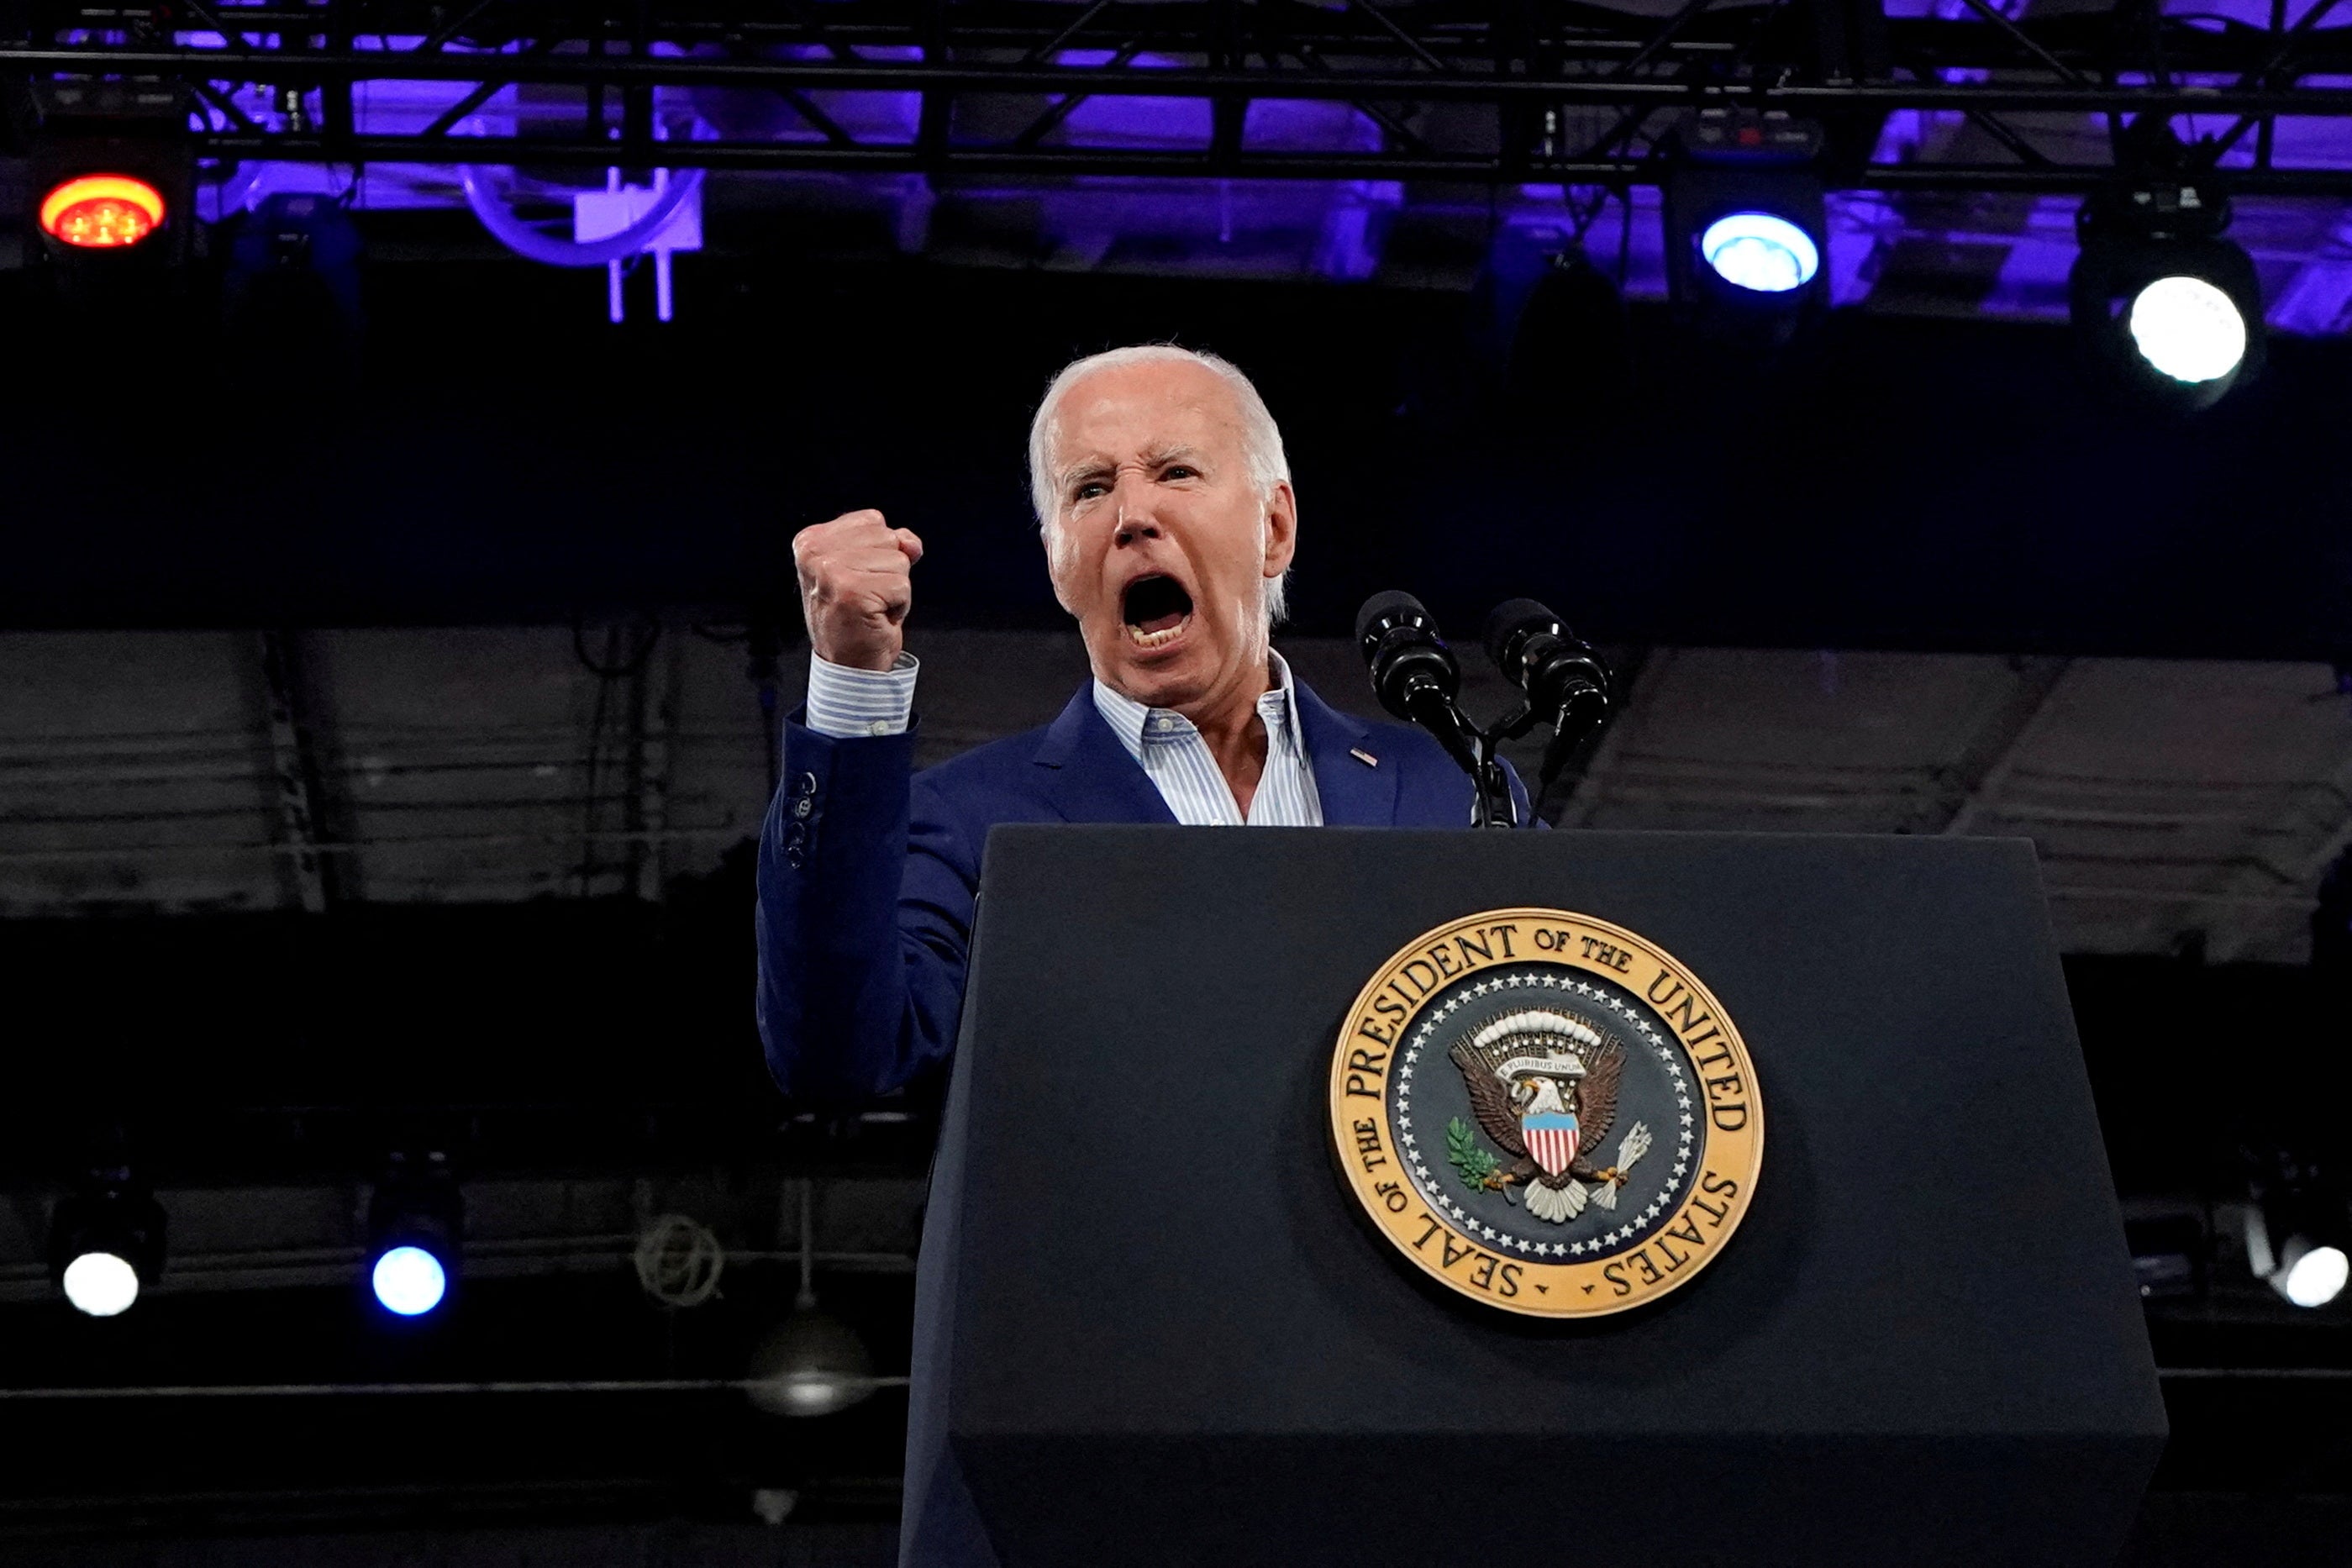 President Joe Biden addresses supporters at campaign rally in North Carolina on June 28.